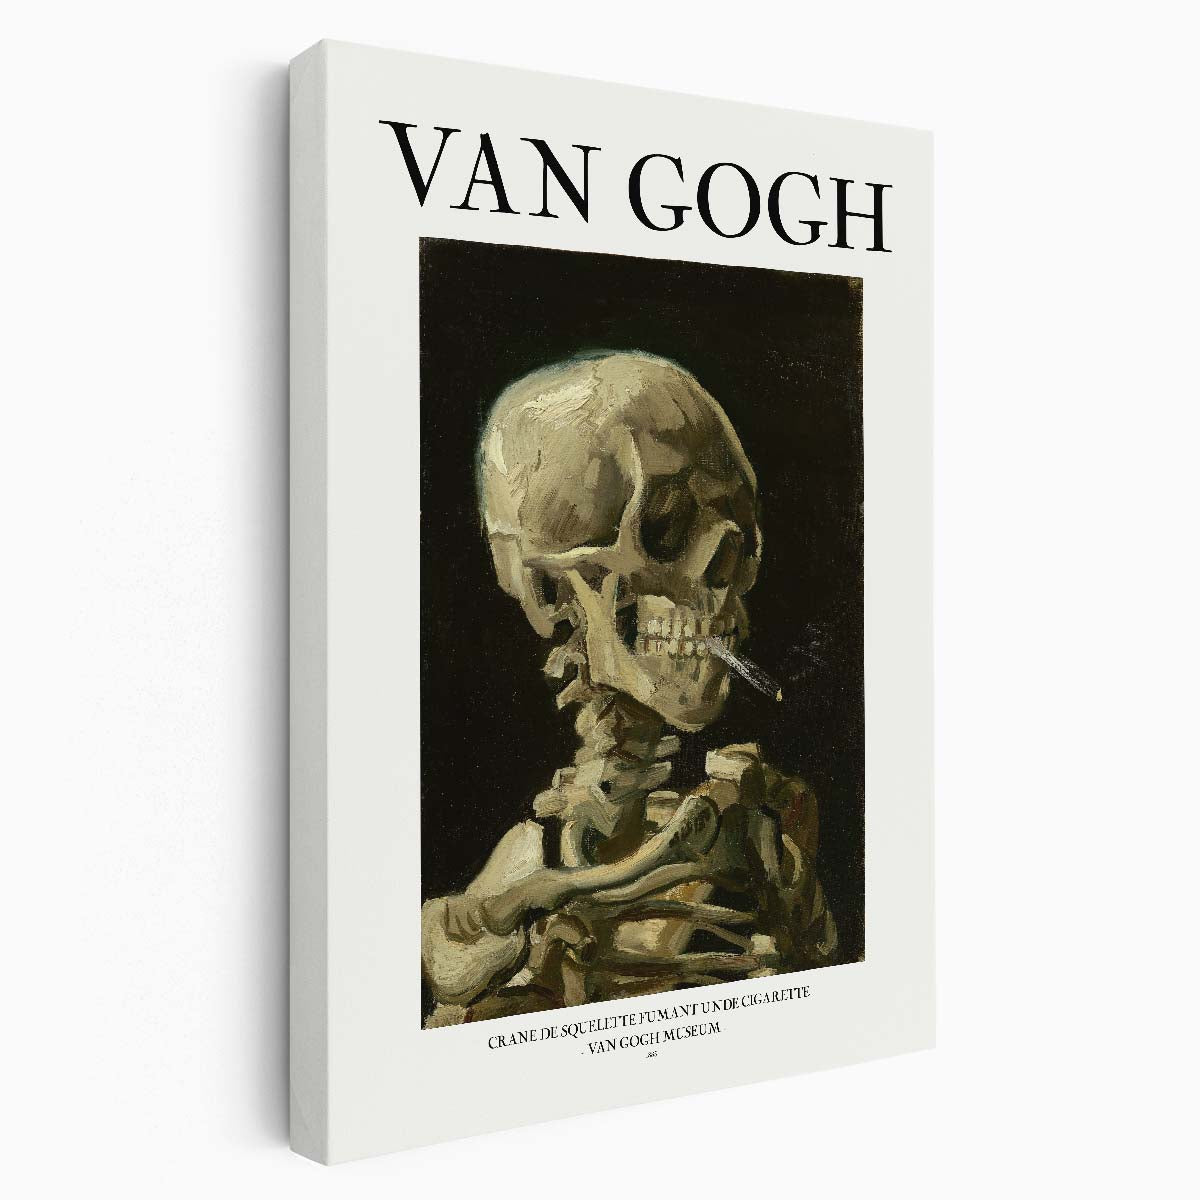 Van Gogh Skull Illustration, Smoking Skeleton Acrylic Painting Poster by Luxuriance Designs, made in USA